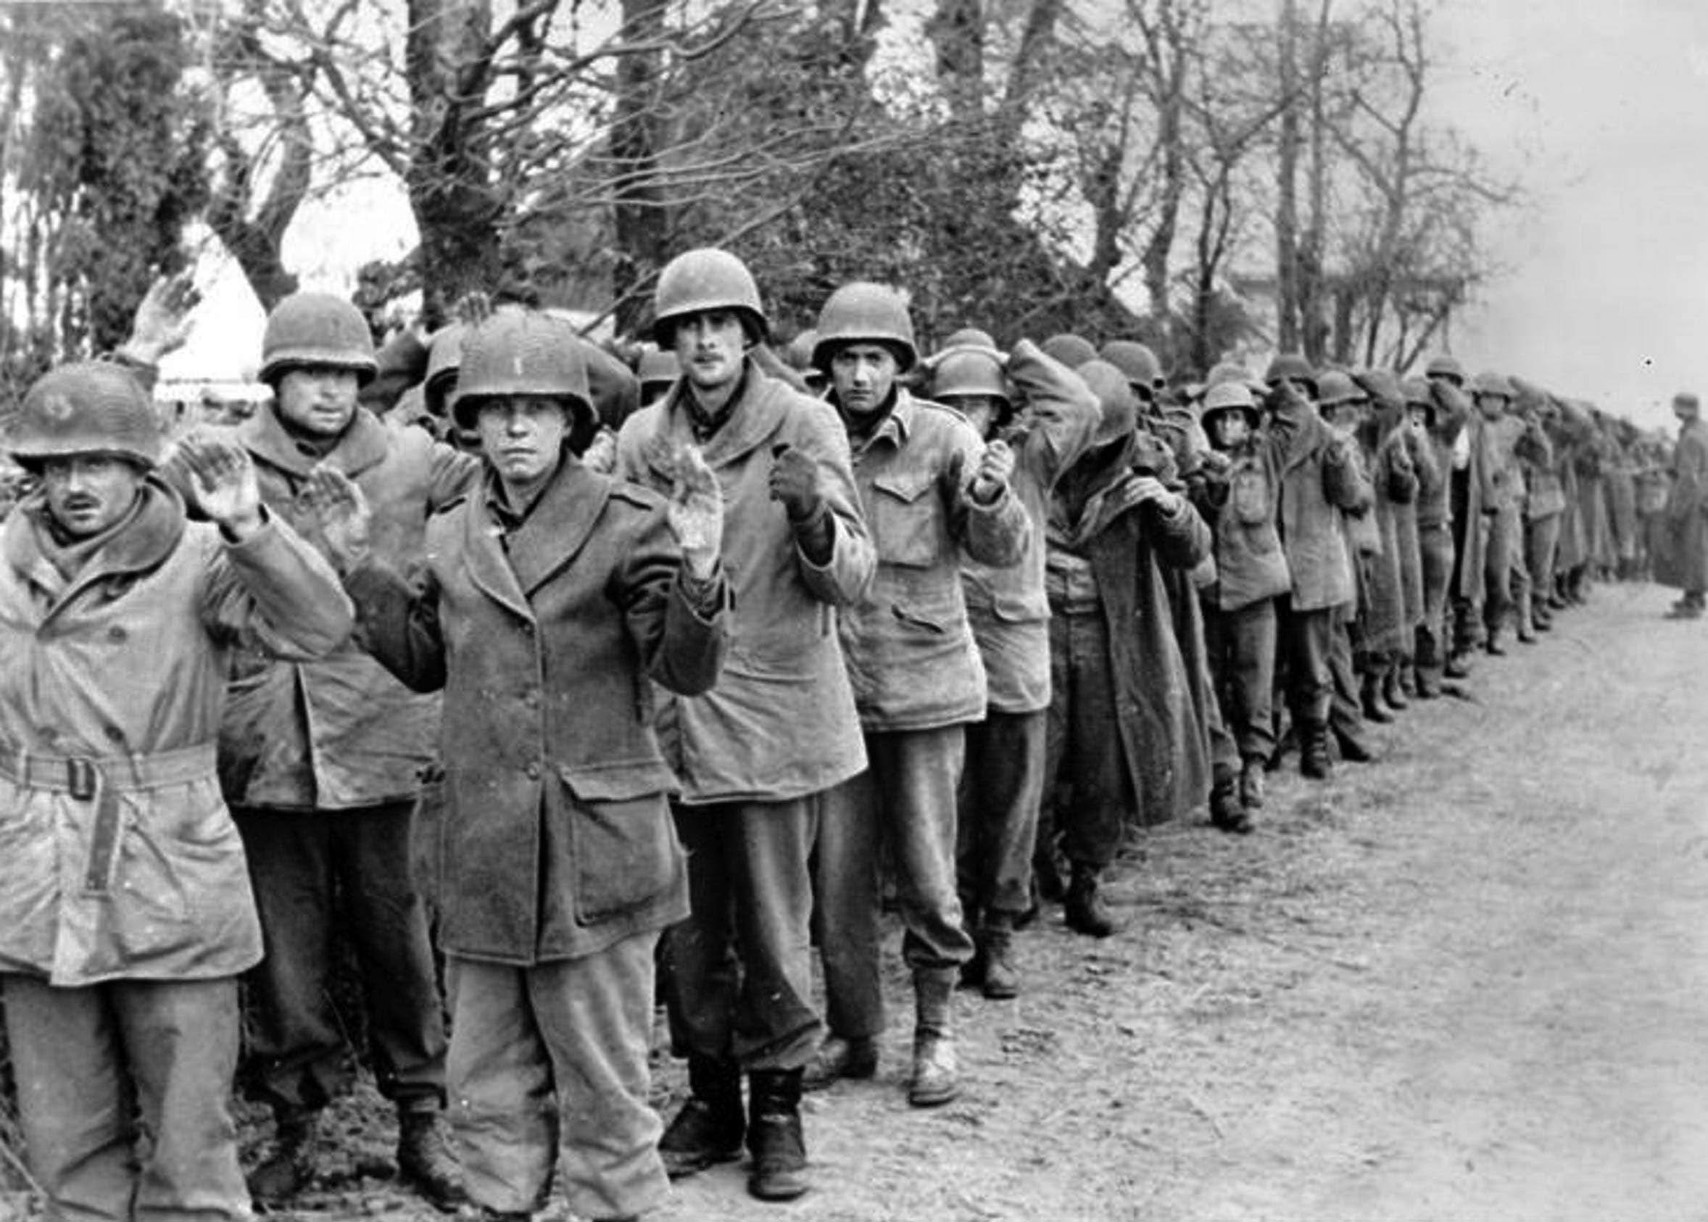 Dazed and confused, American soldiers captured by the Germans during the opening phase of the Battle of the Bulge march with their hands in the air toward an uncertain fate. The stand by the 394th I&R Platoon at Lanzerath was critical in slowing the German advance.